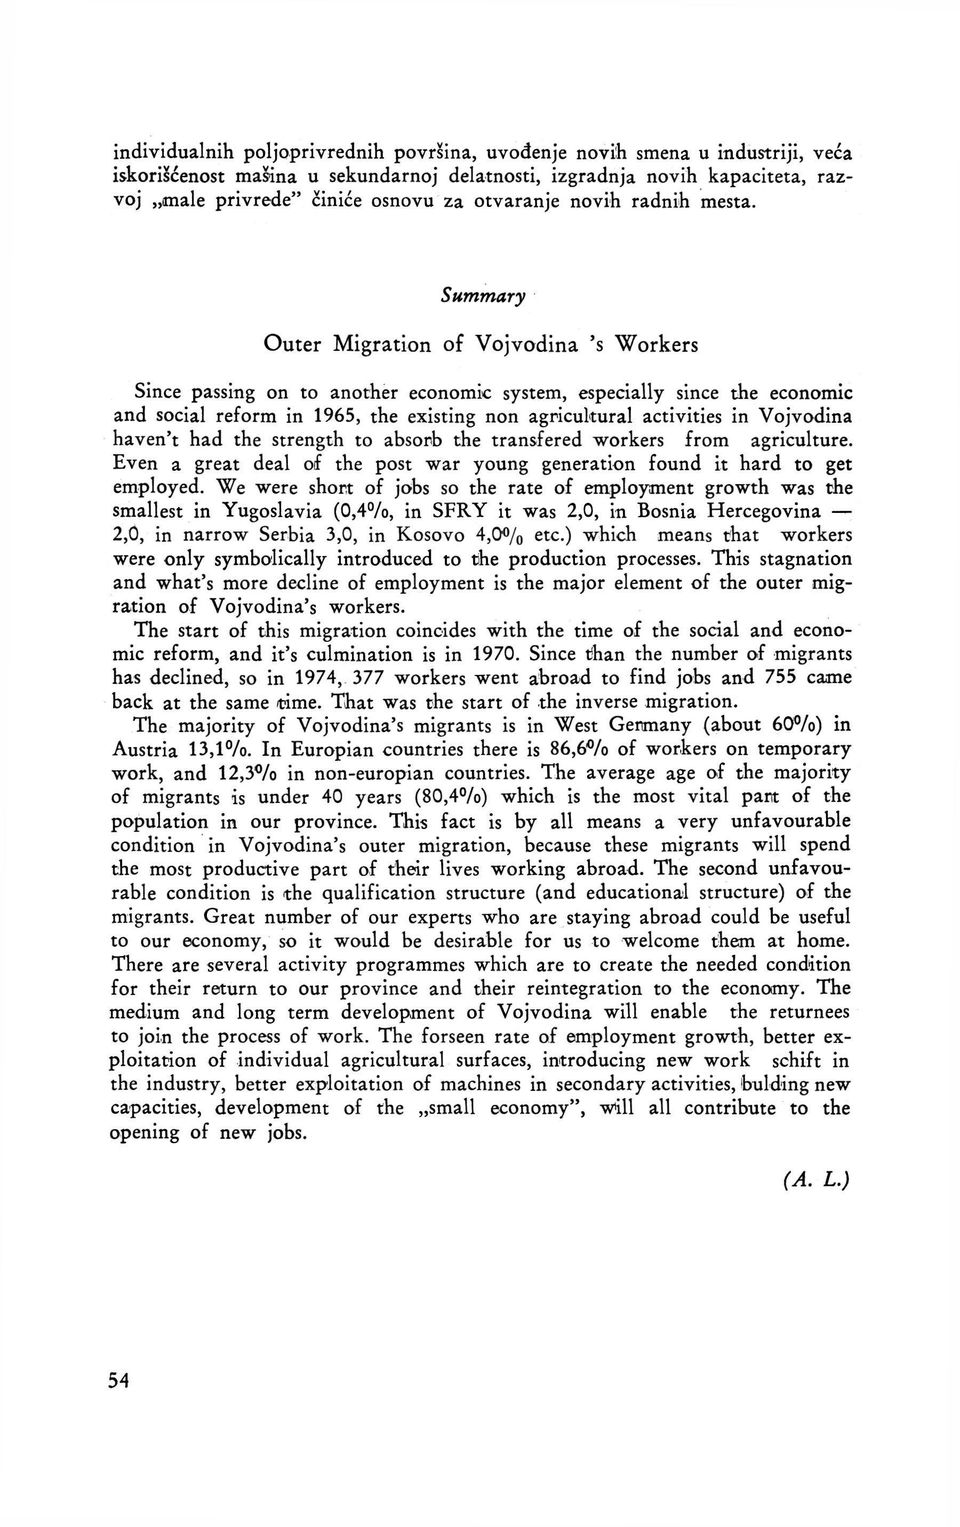 Summary Outer Migration of Vojvodina 's Workers Since passing on to another economic system, especially since the economic and social reform in 1965, the existing non agricultural activities in